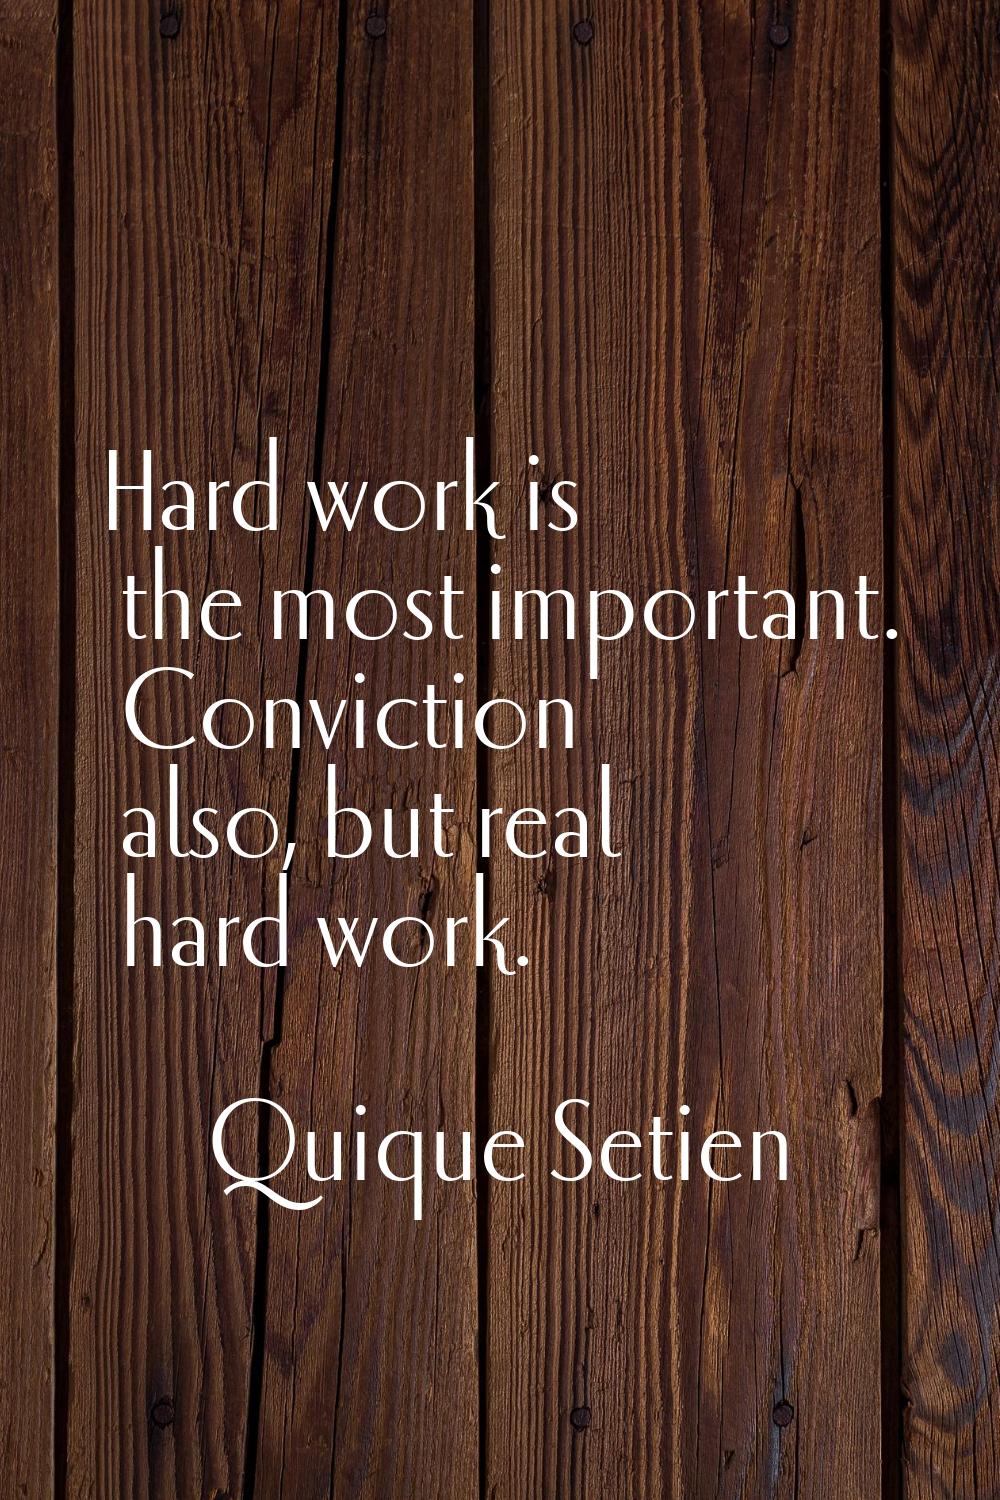 Hard work is the most important. Conviction also, but real hard work.